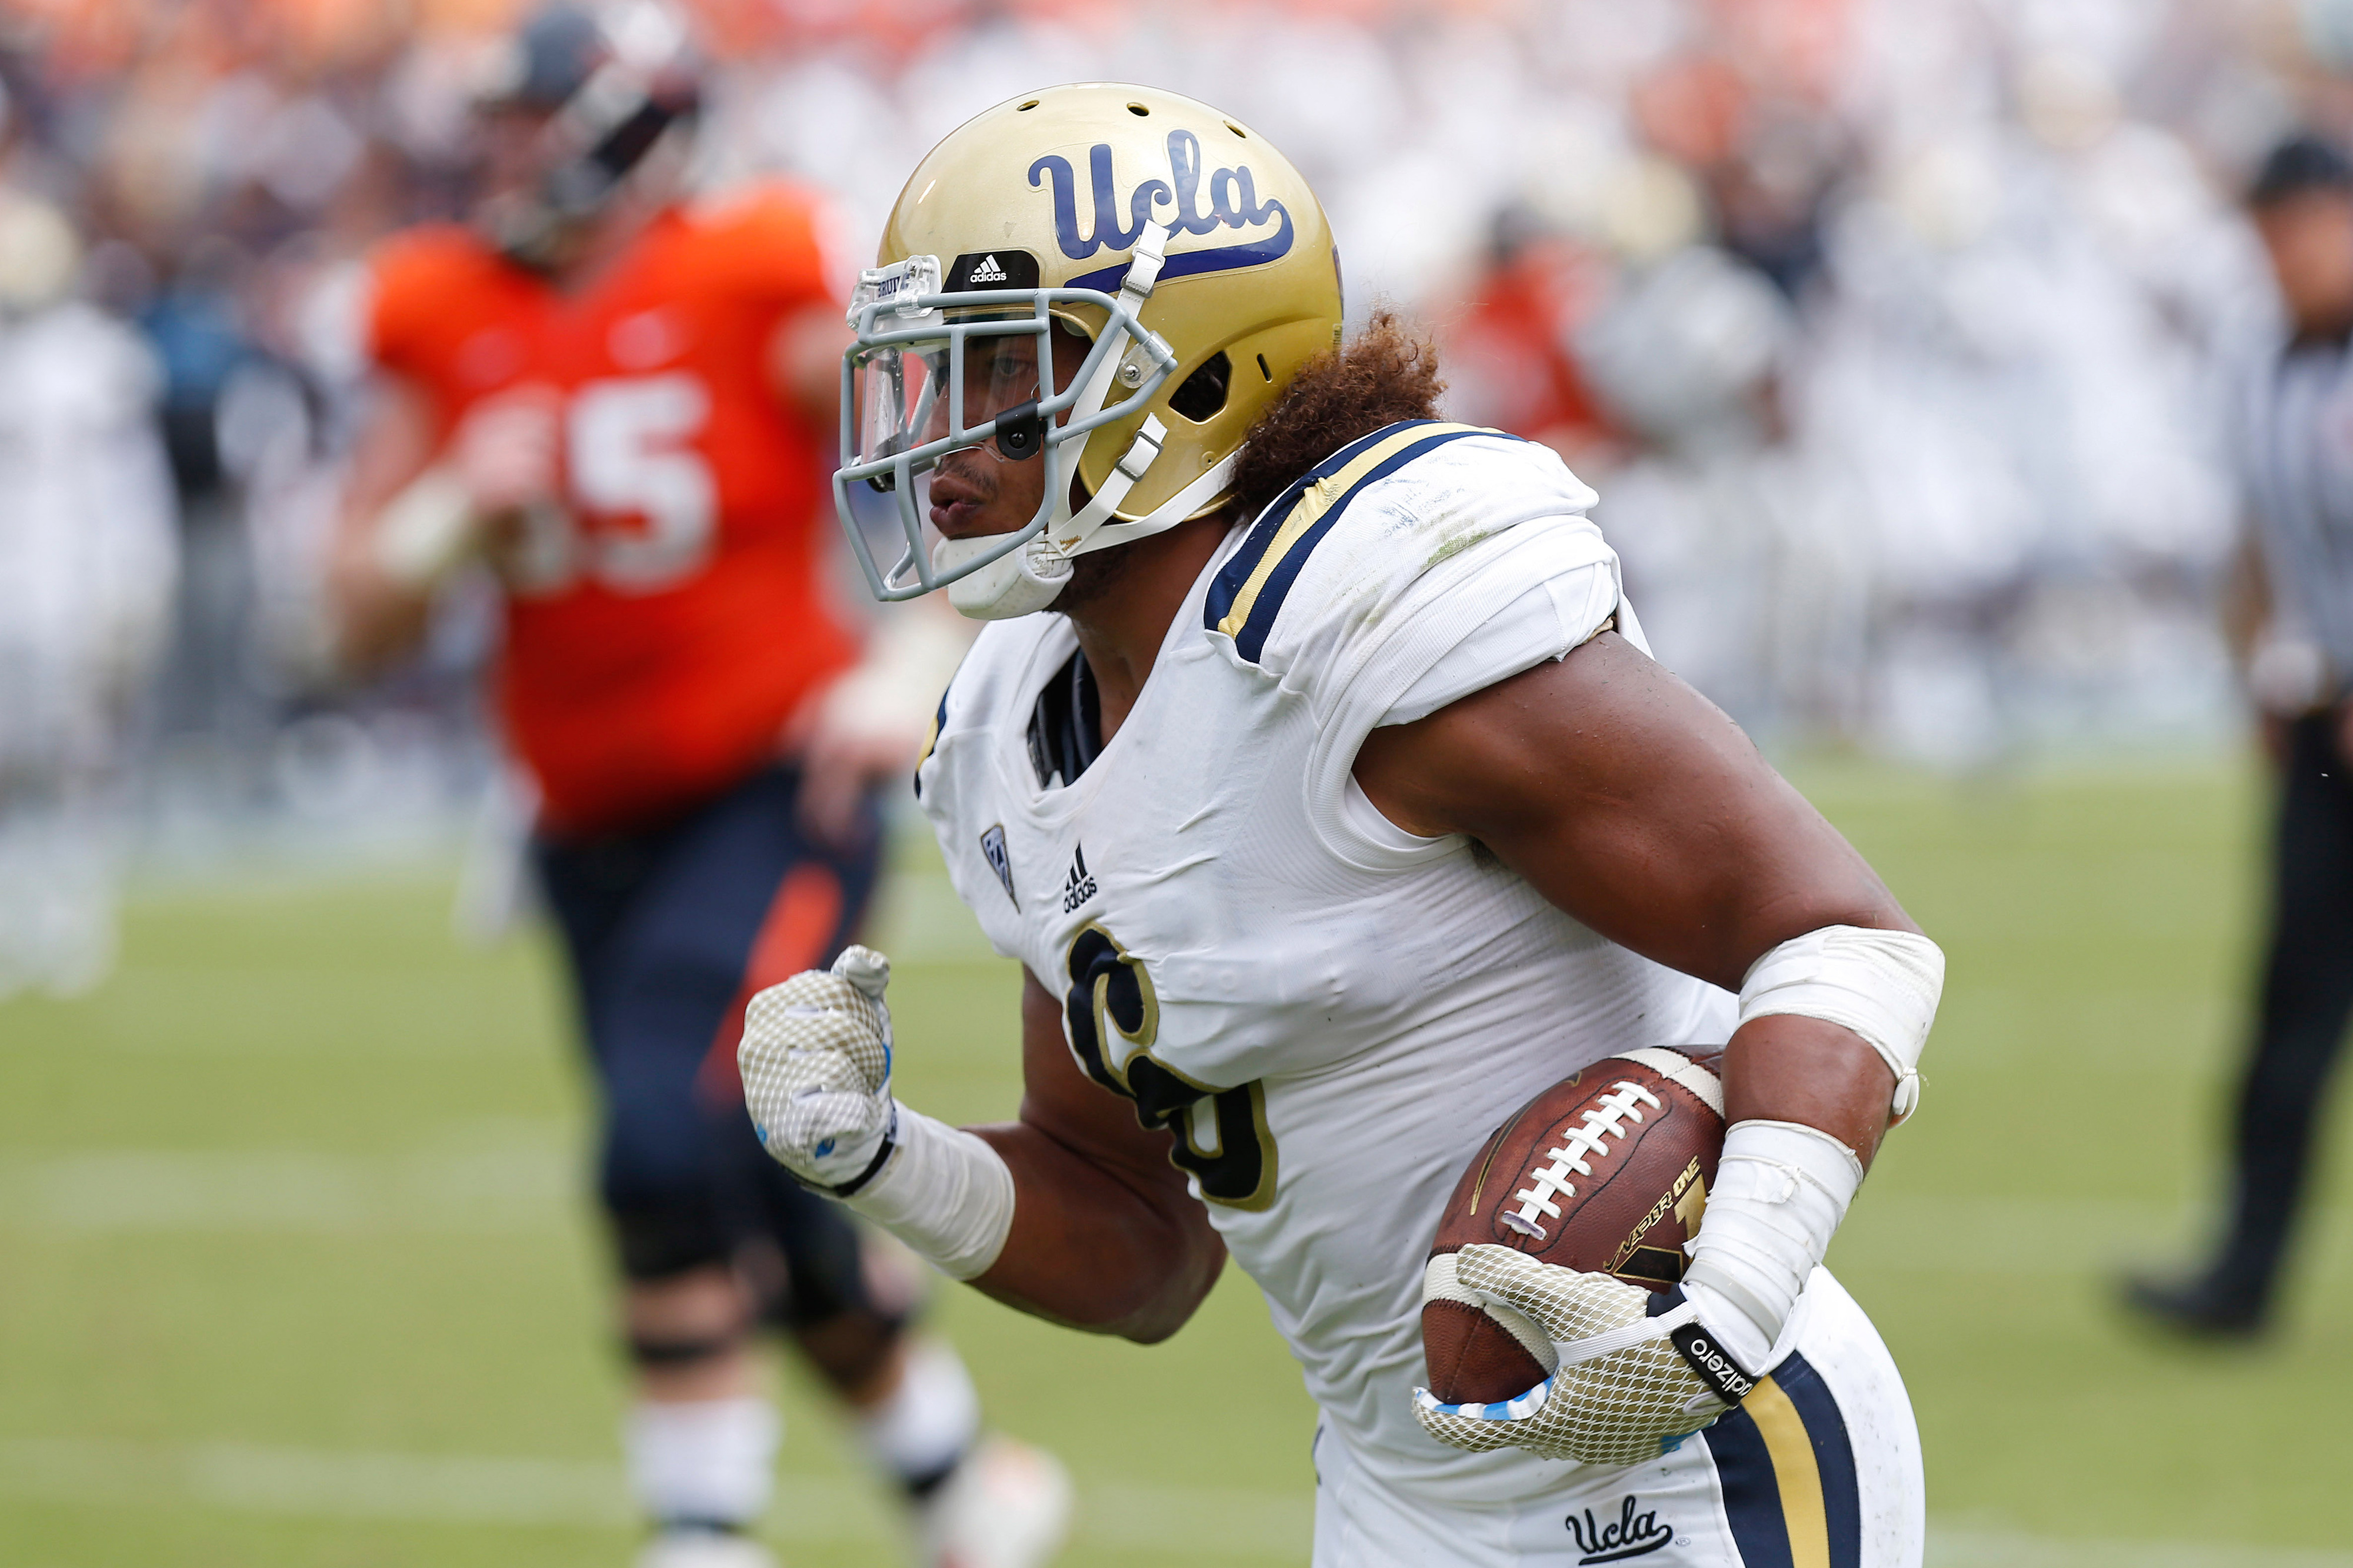 Eric Kendricks is the Pac-12 Defensive Player of the Week for Week 1.